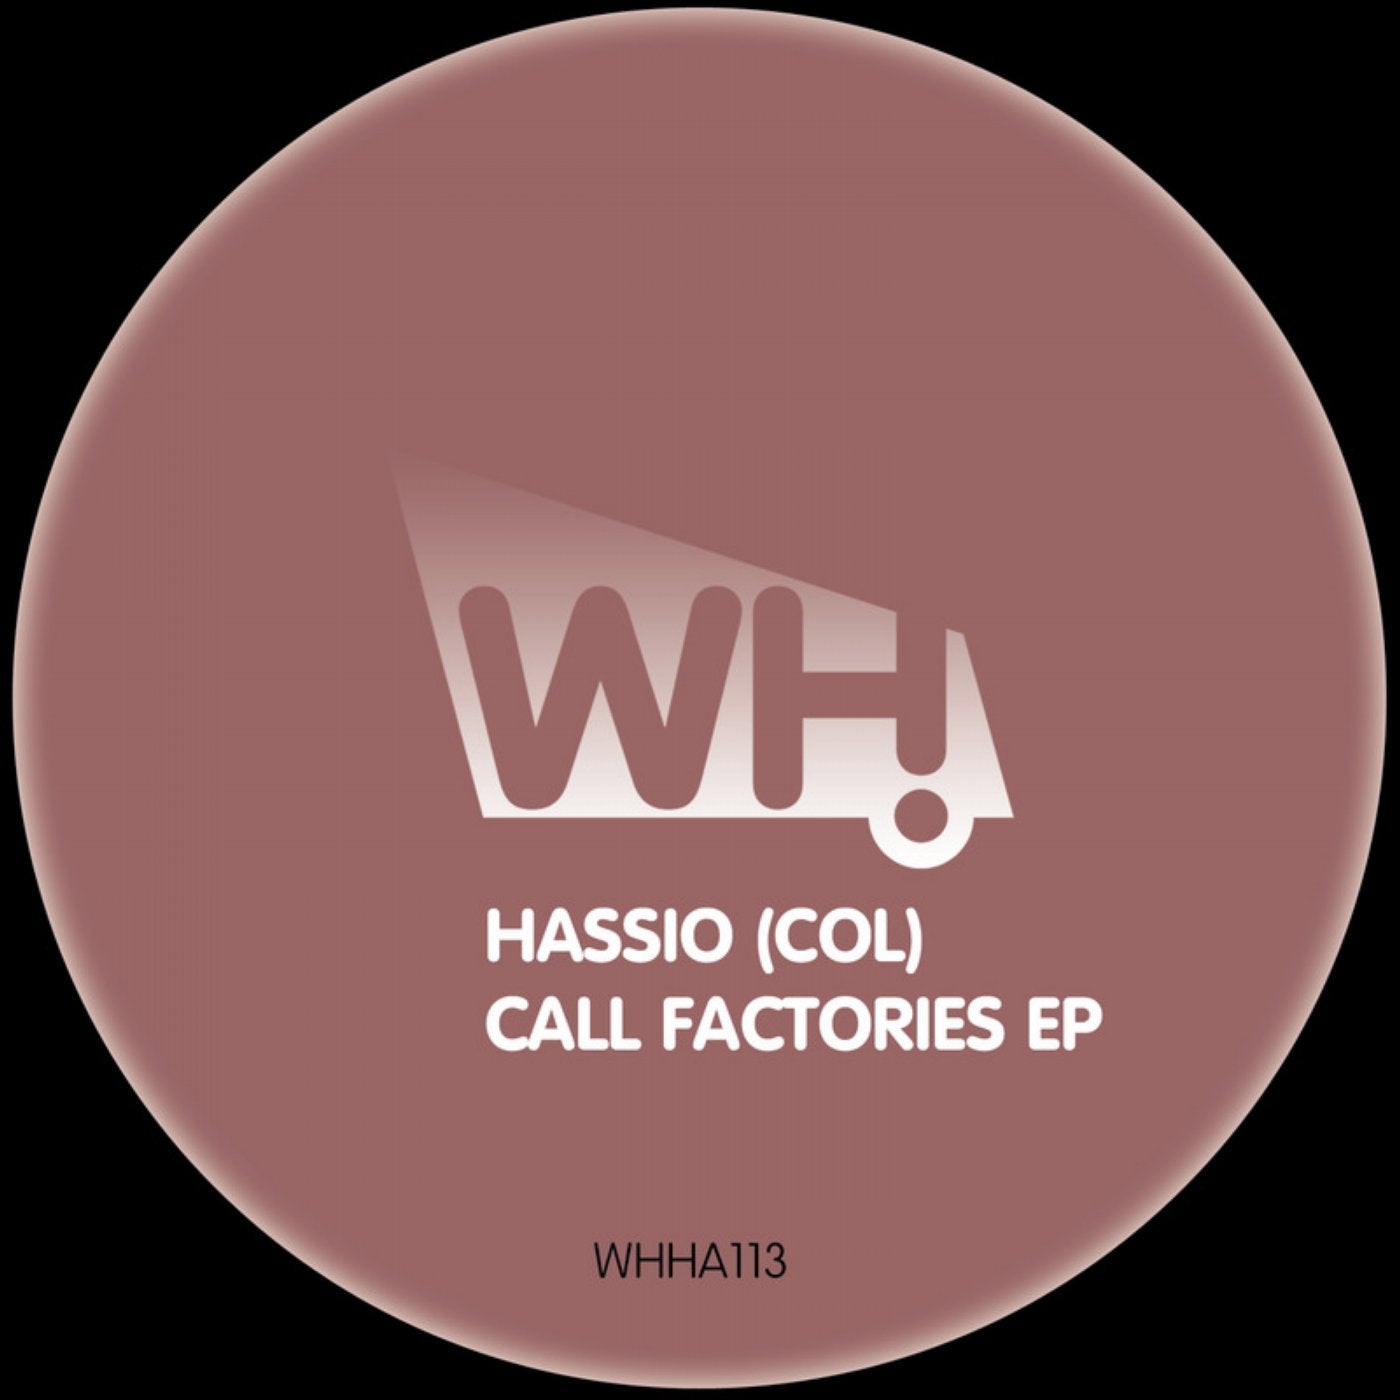 Call Factories EP